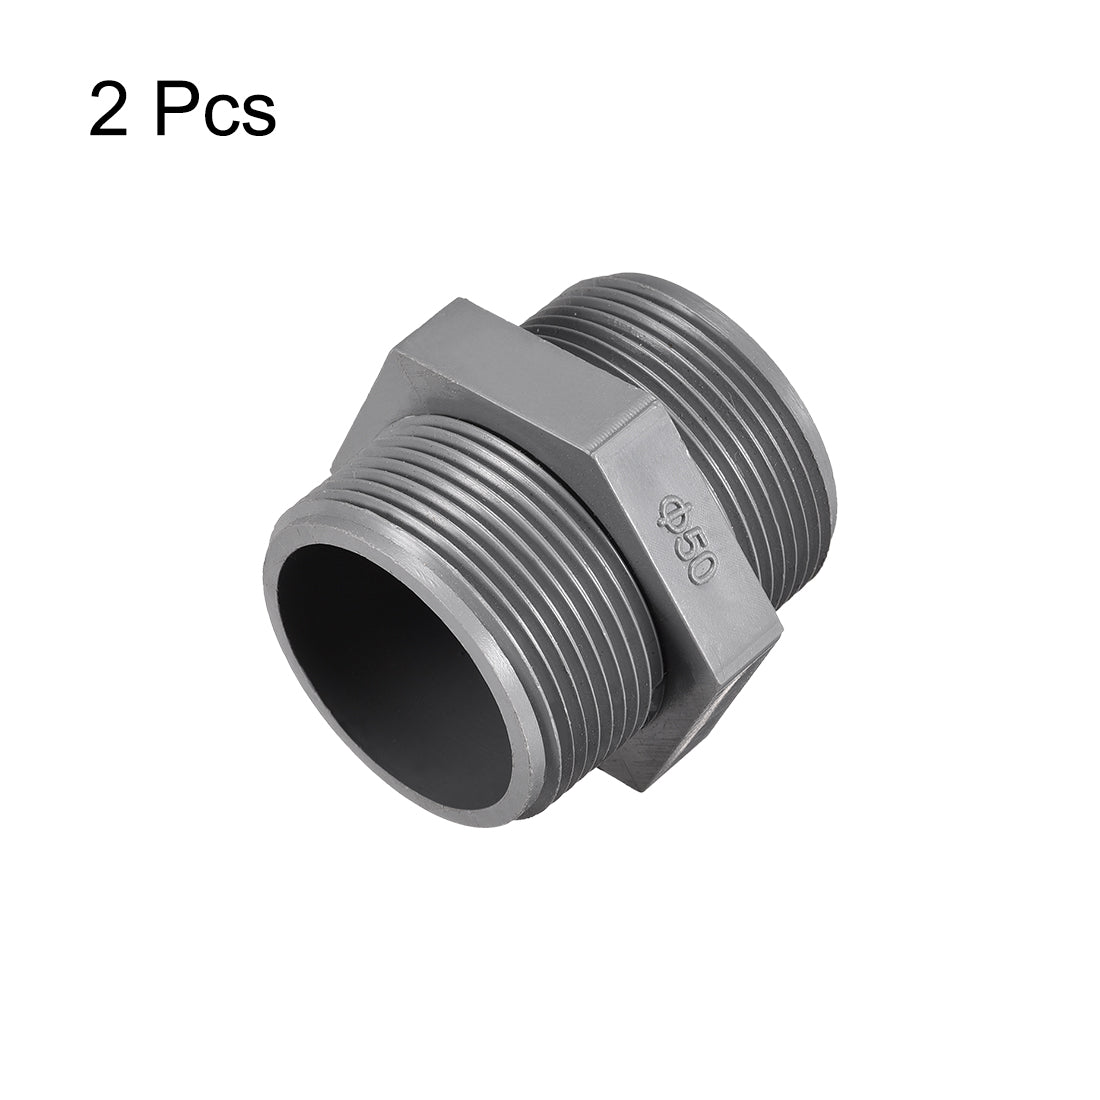 uxcell Uxcell Pipe Fittings Connector G1-1/2 Male Thread Adapter Plastic Hex Connector 2pcs